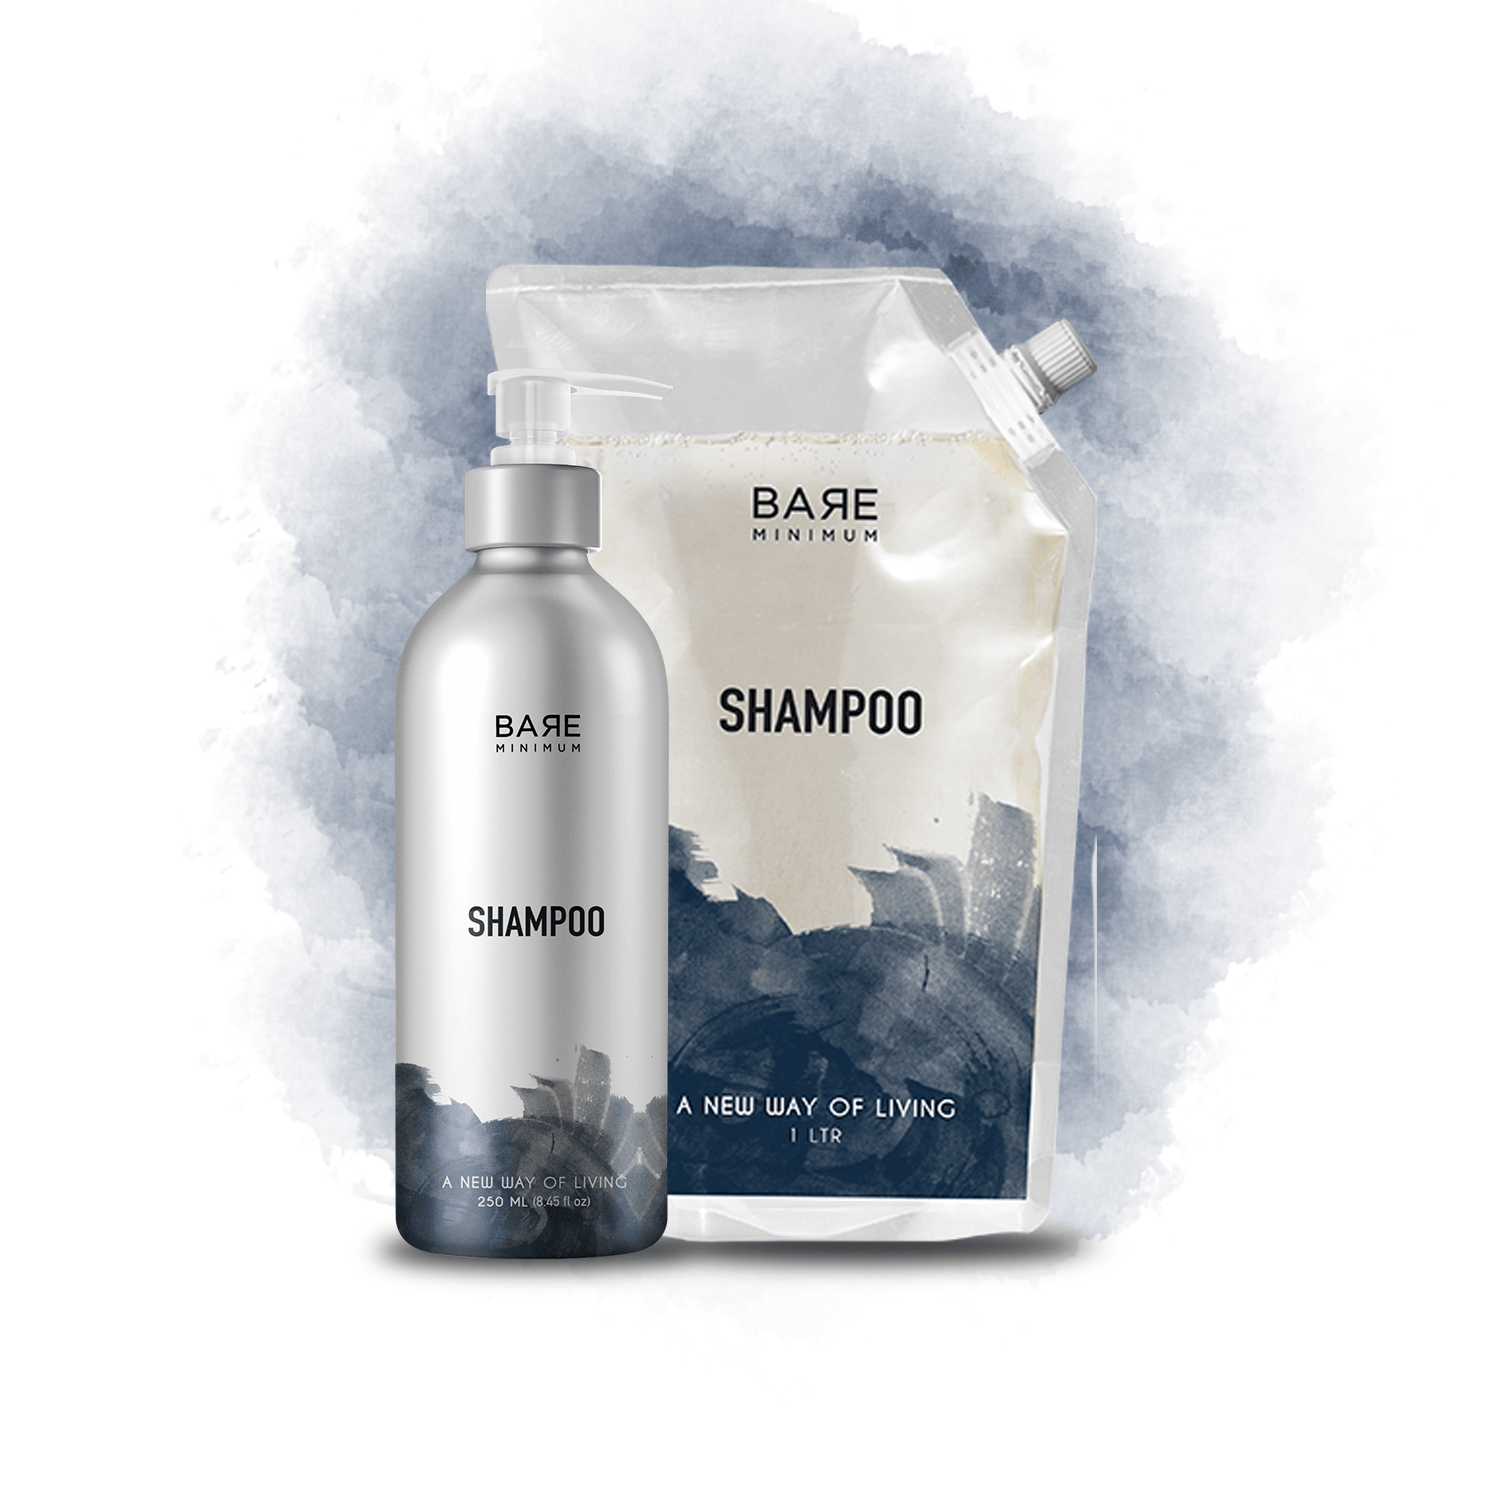 Bare Minimum | Combo of Gentle Shampoo + Refill Pack | With Extracts of Bhringraj, Brahmi, Shikakai, Chemical-free, with pH-balanced formula, Gender Neutral (Shampoo Bottle 250ML+Refill Pack 1L)